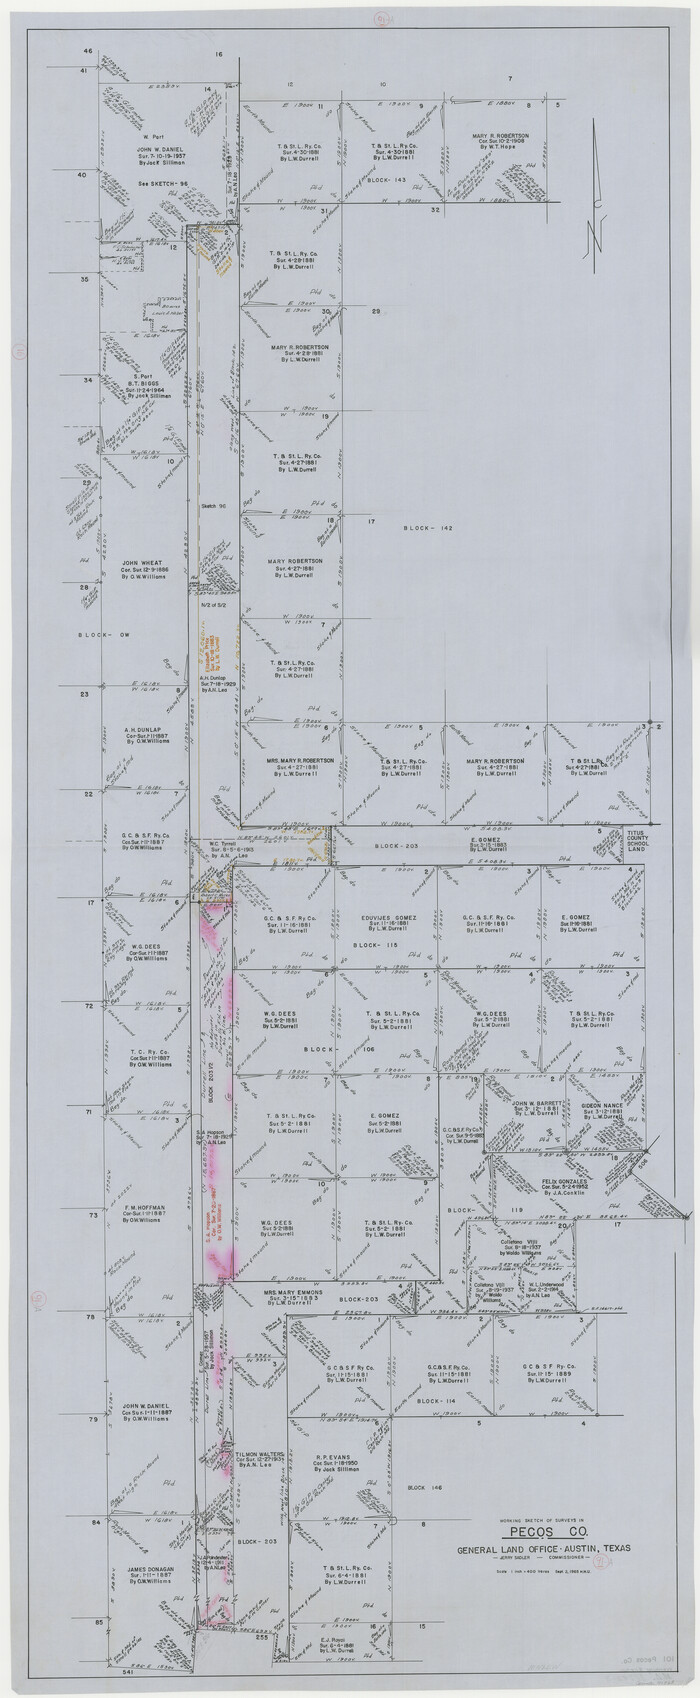 71563, Pecos County Working Sketch 91a, General Map Collection